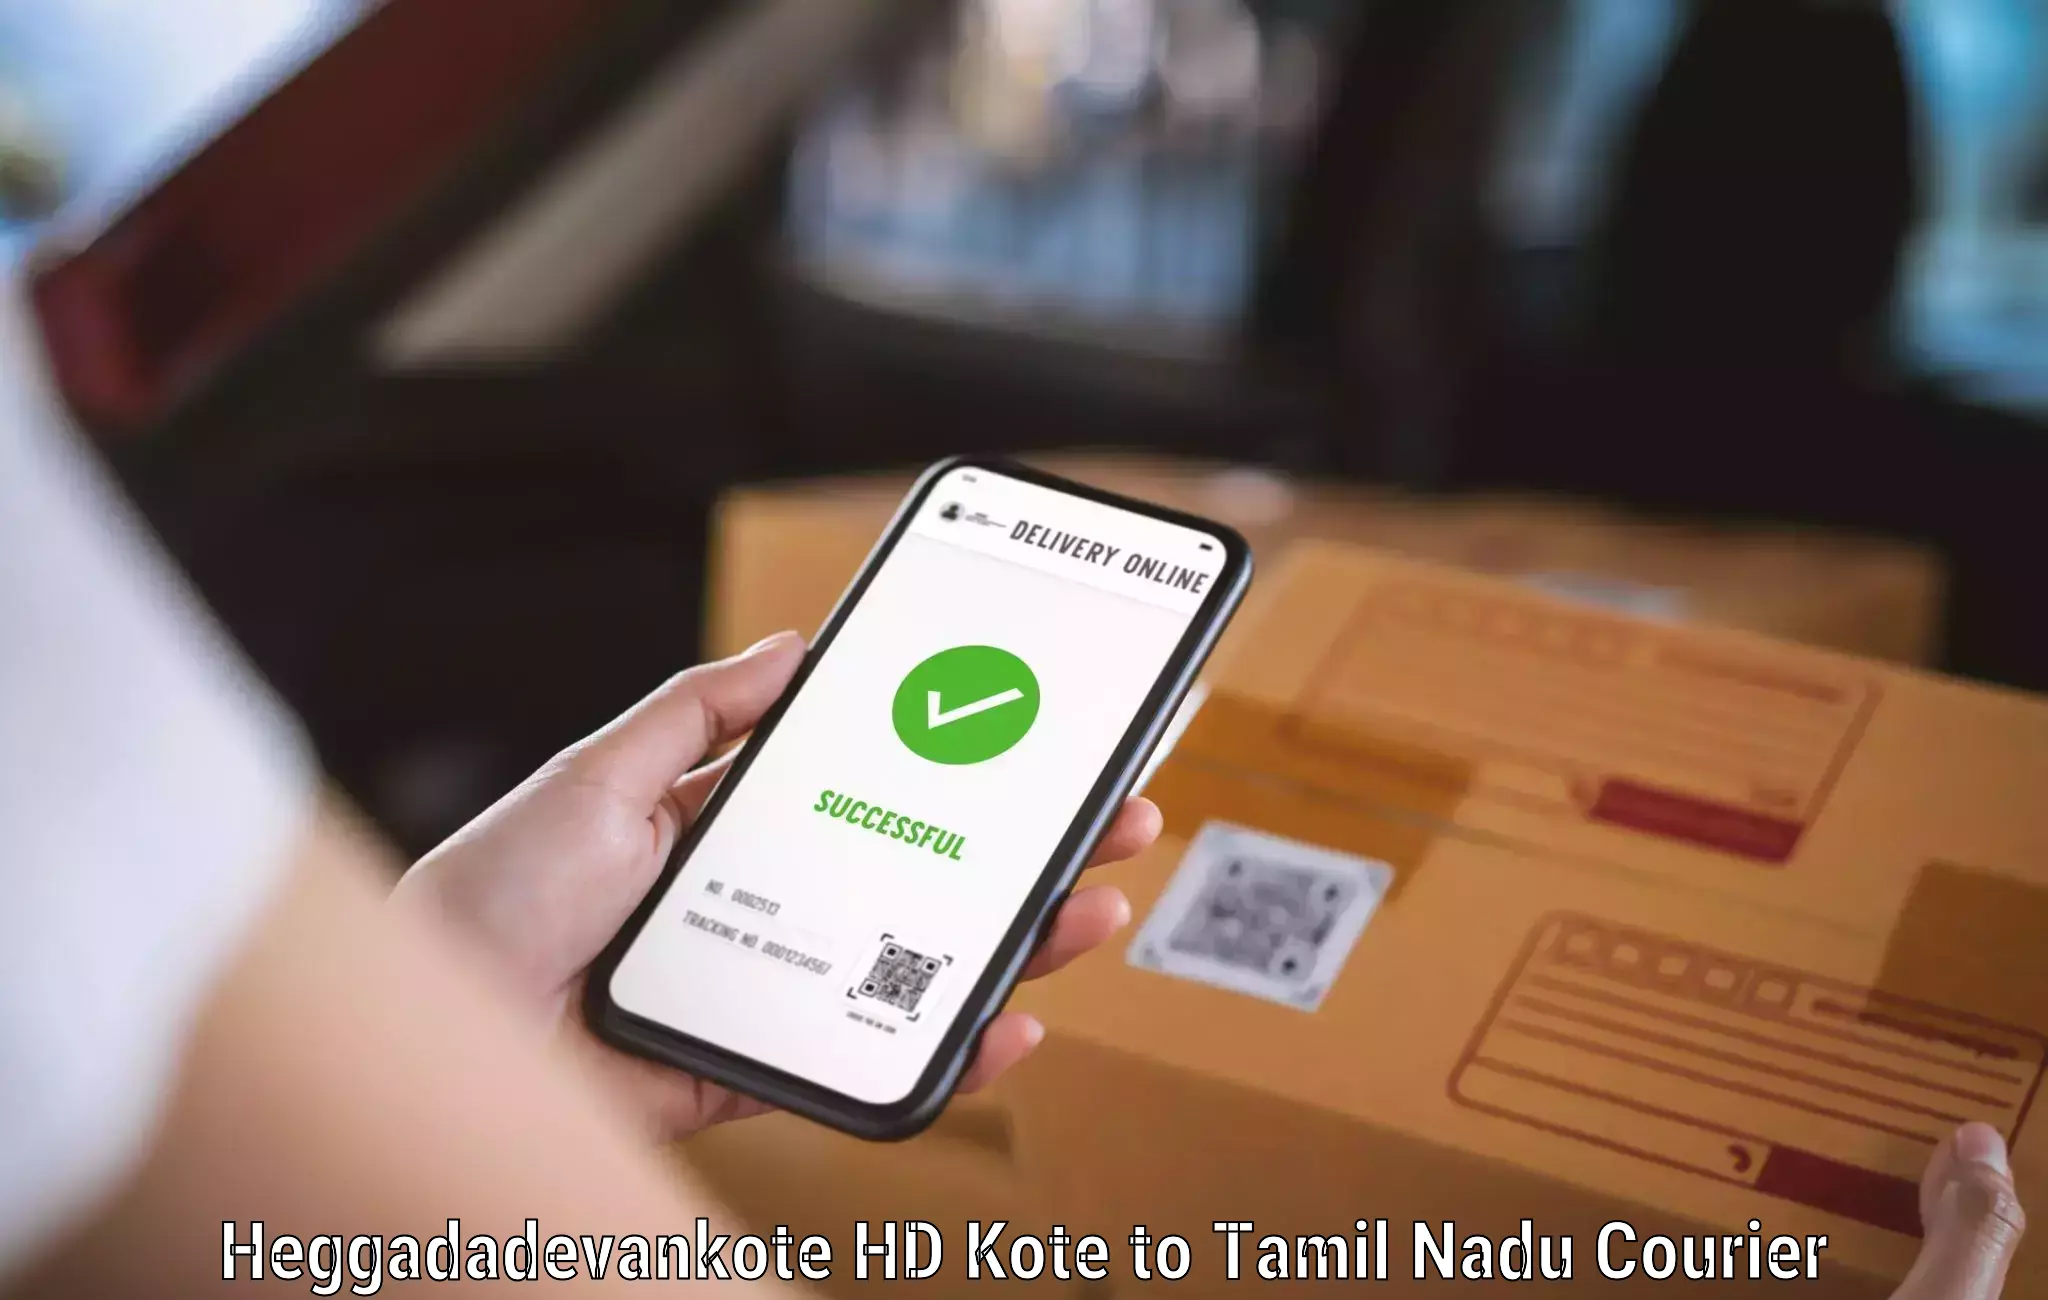 Cost-effective courier solutions Heggadadevankote HD Kote to Papanasam